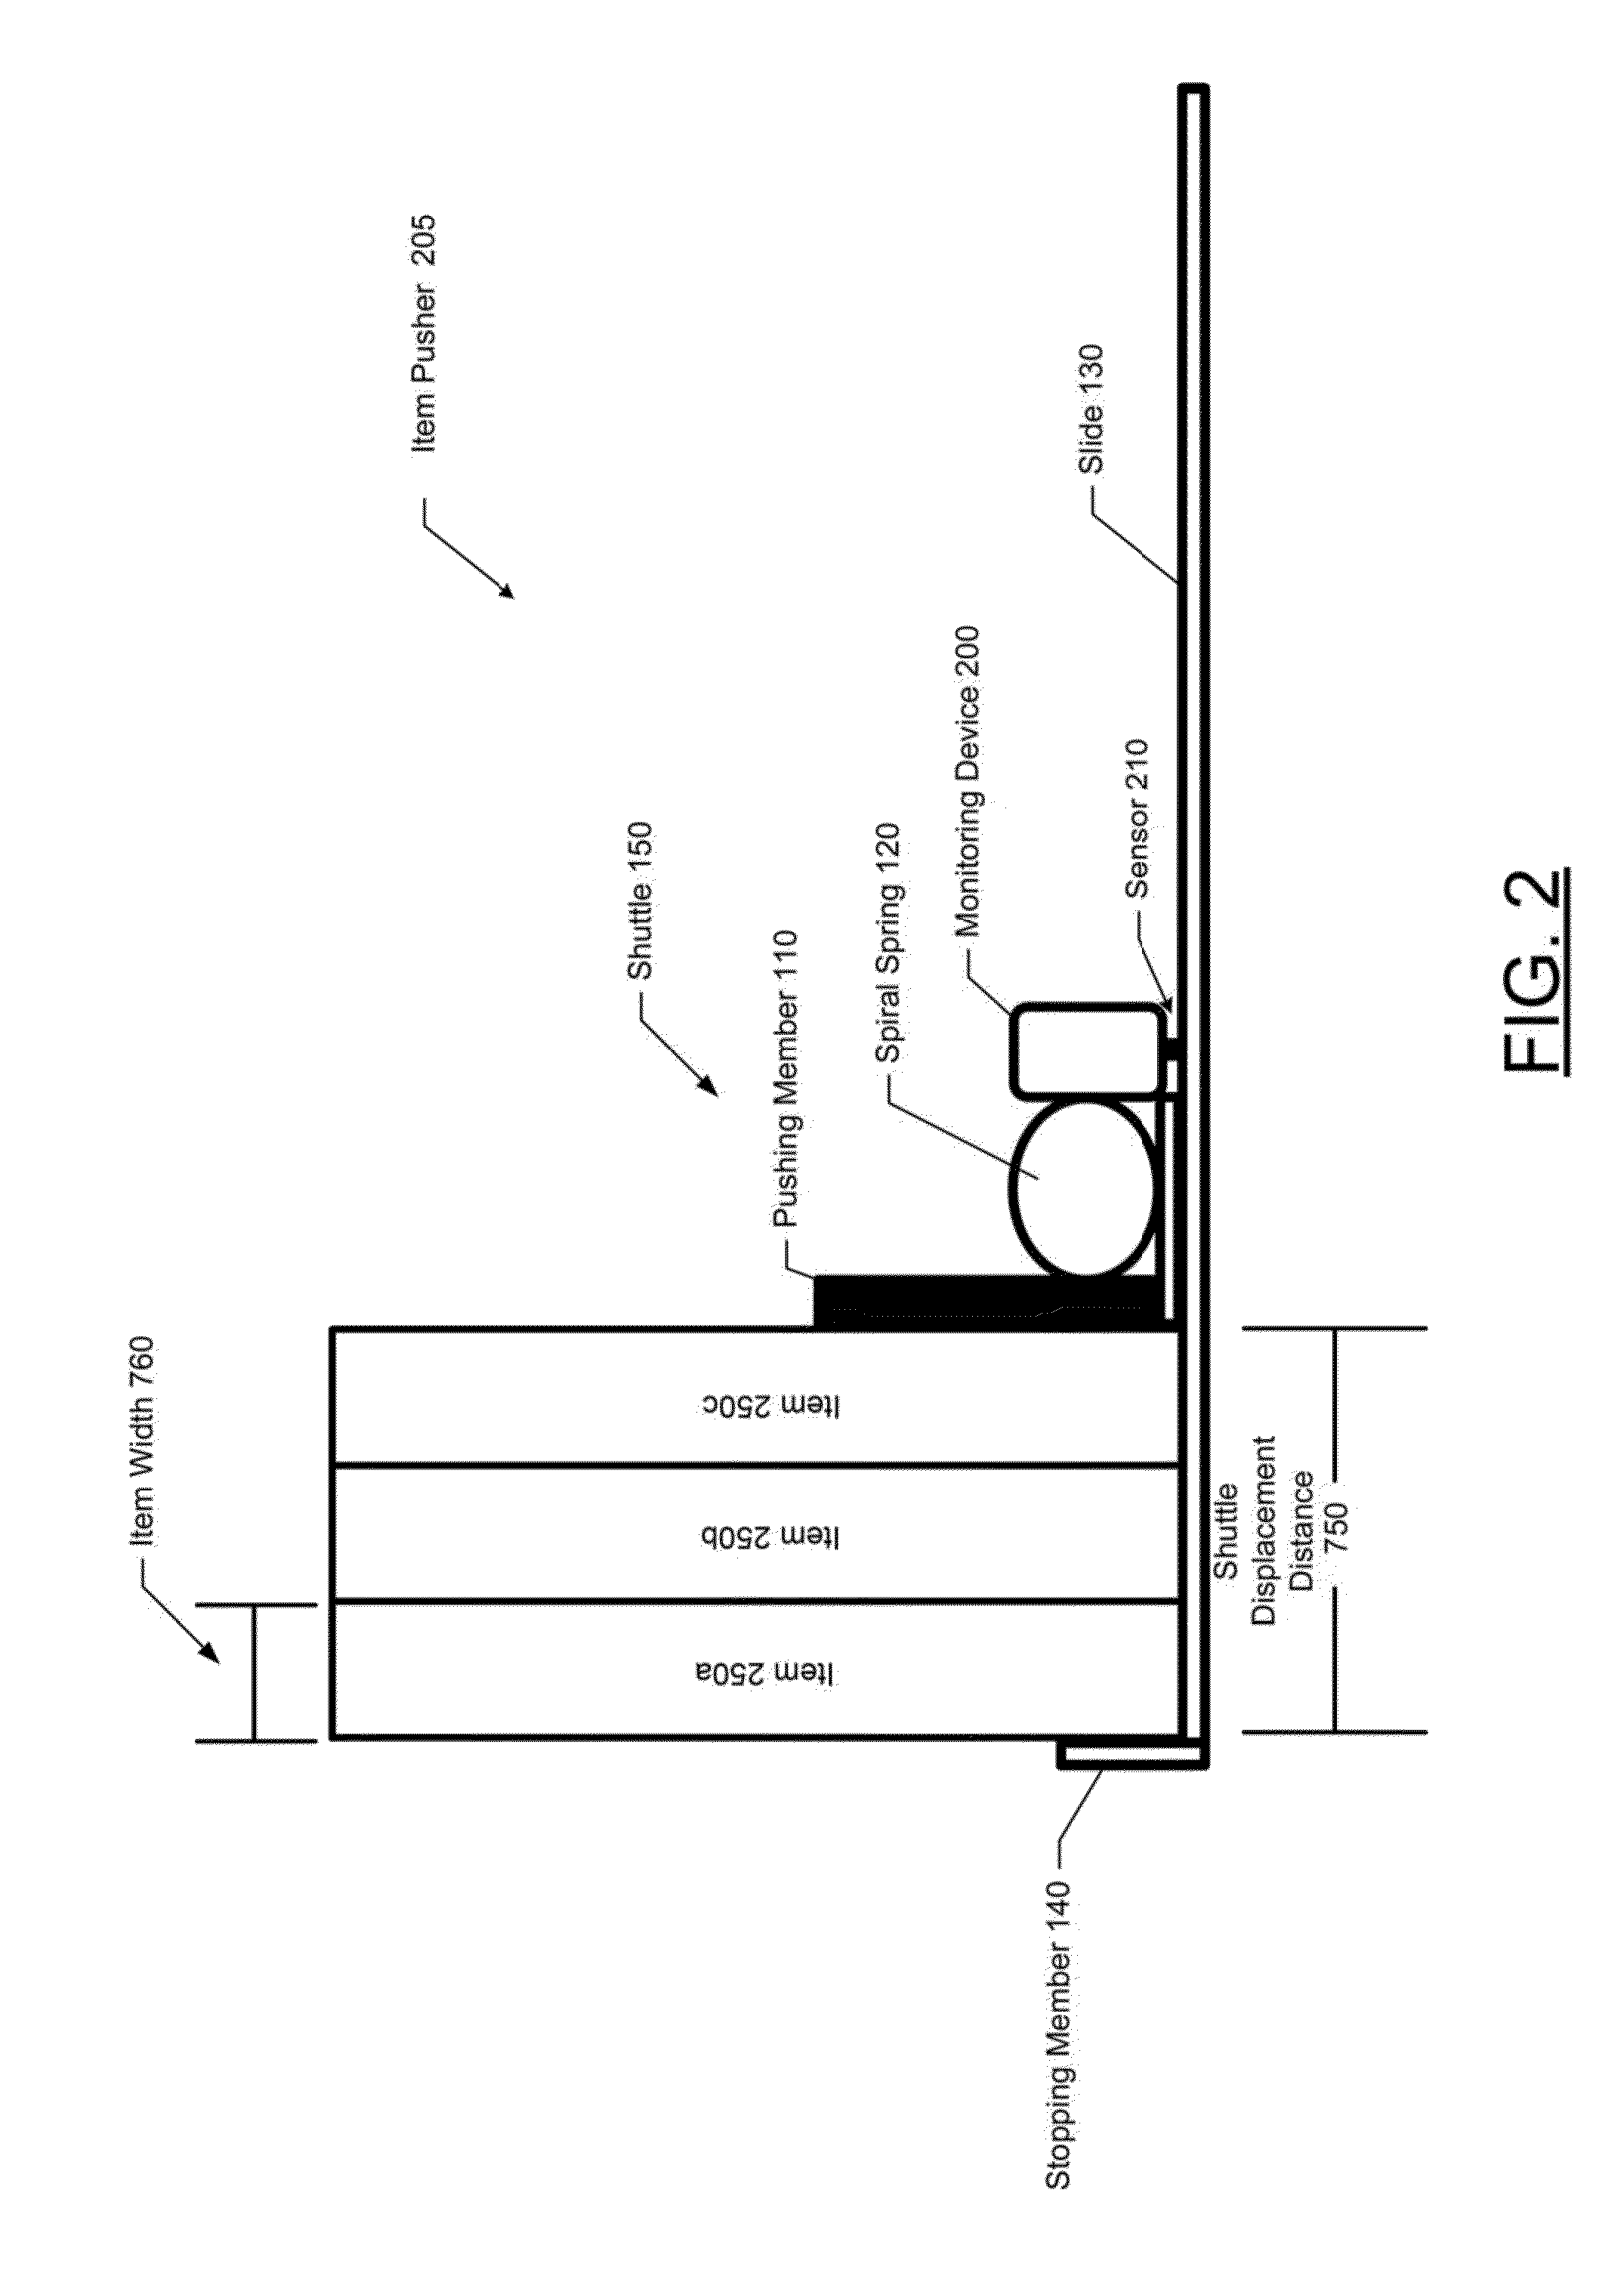 Item pusher apparatus with channel-based shuttle displacement detection and associated methods